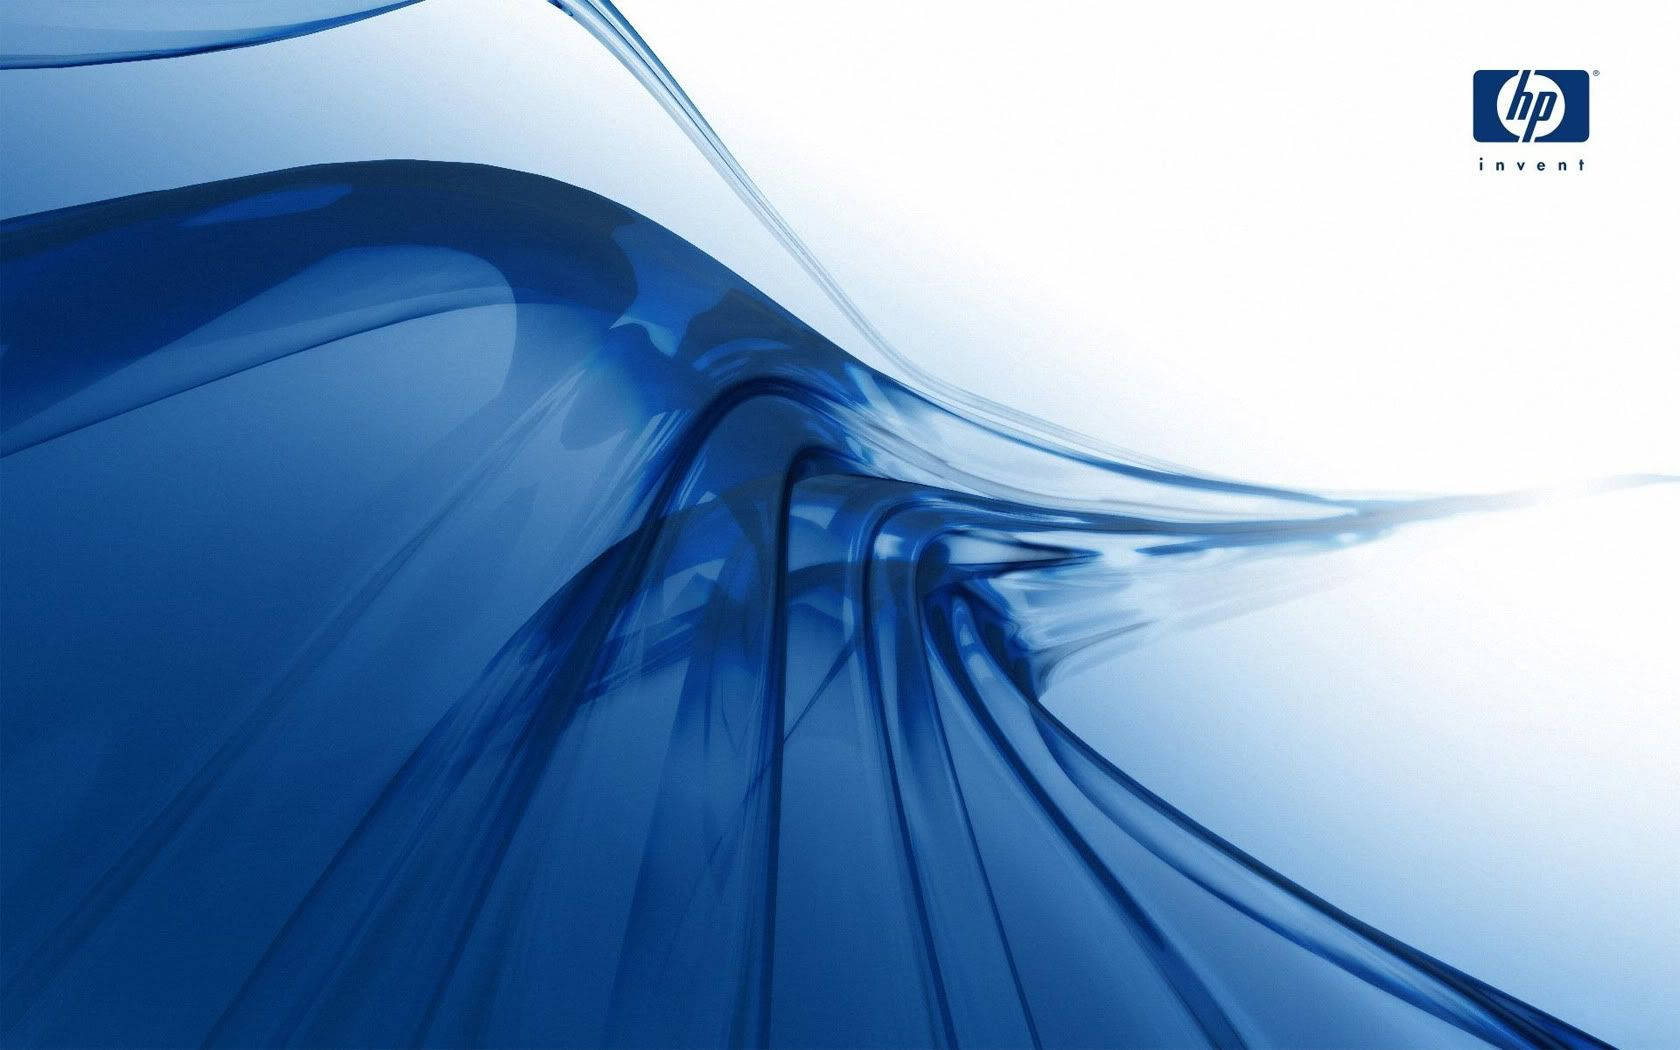 Blue Glass-like Waves Hp Invent Wallpaper